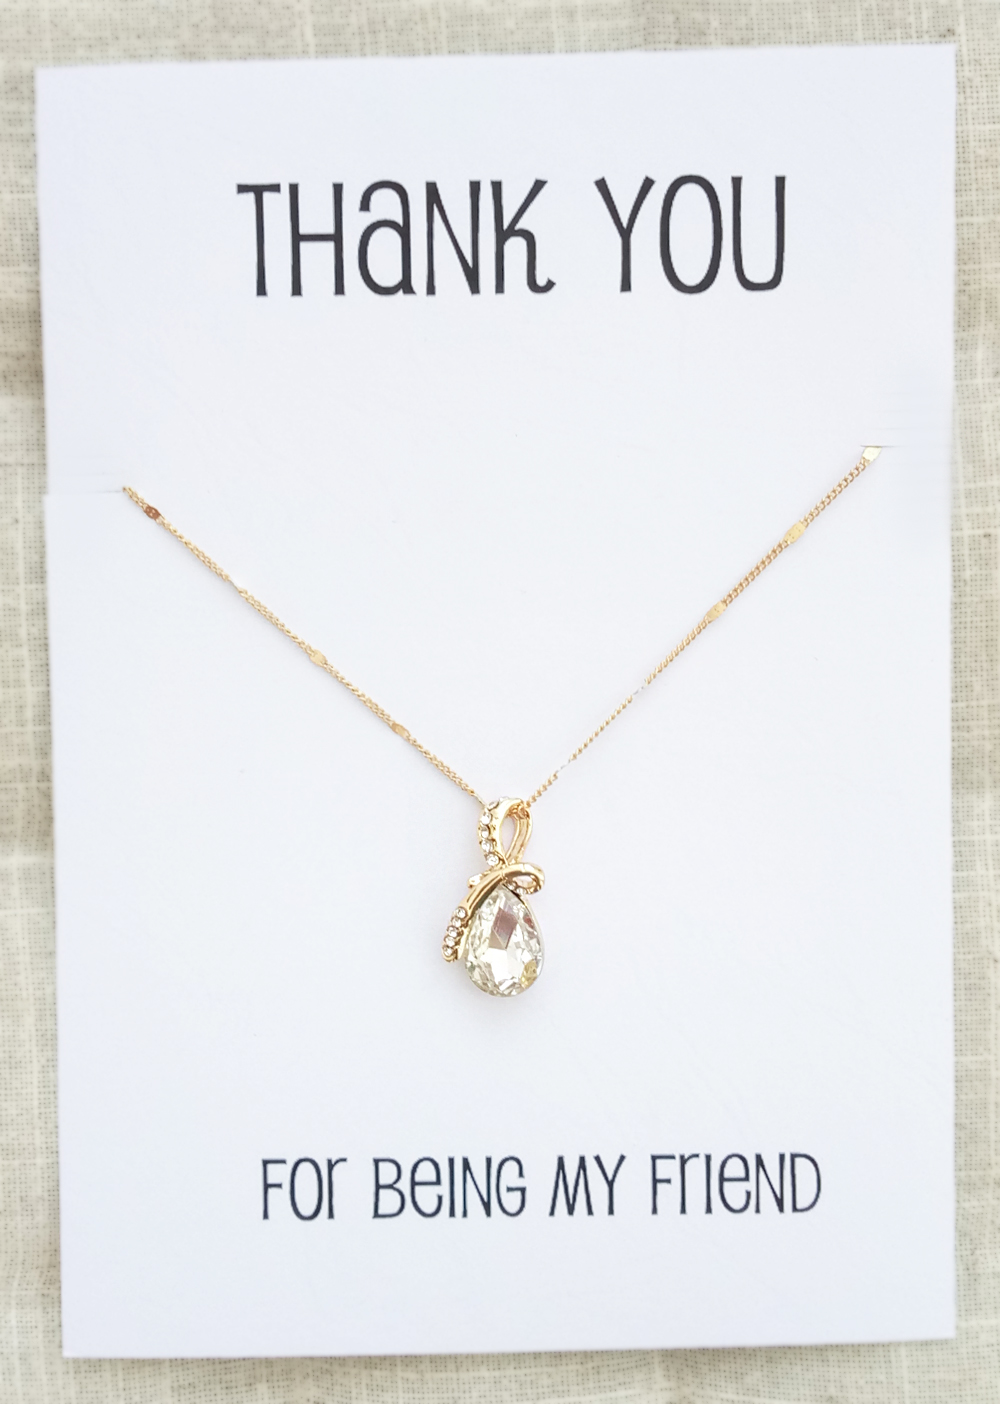 Thank You For Being My Friend Water Drop Crystal Pendant Gold Toned Chain Woman Fashion Necklace